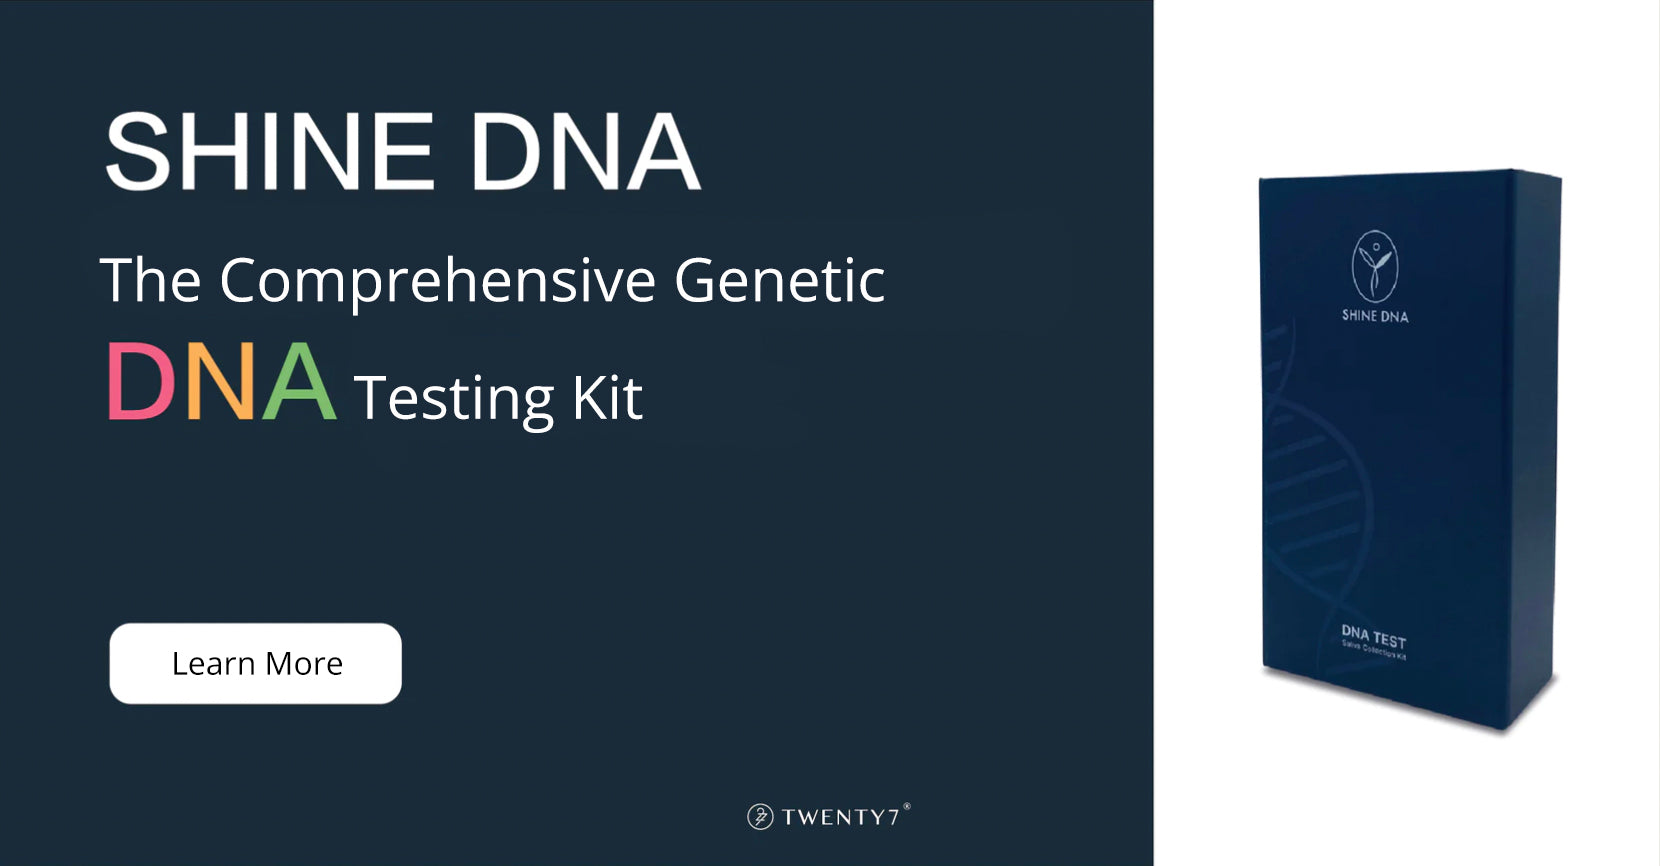 Introducing SHINE DNA: The Comprehensive Genetic Testing Kit